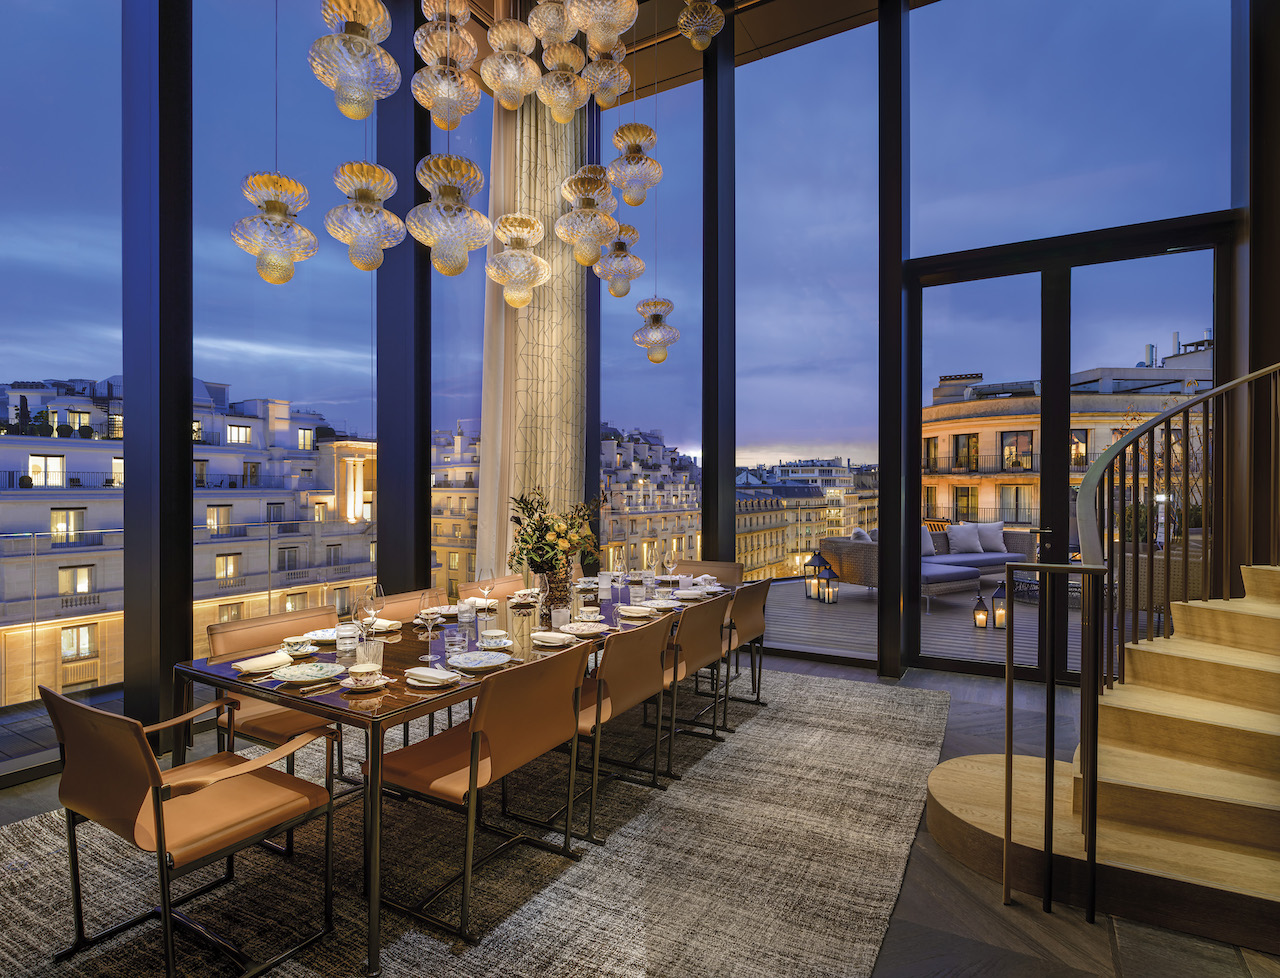 Headed for a European river cruise? Spend a couple of nights in the City of Light with the opening of the stunning Bulgari Hotel Paris. 